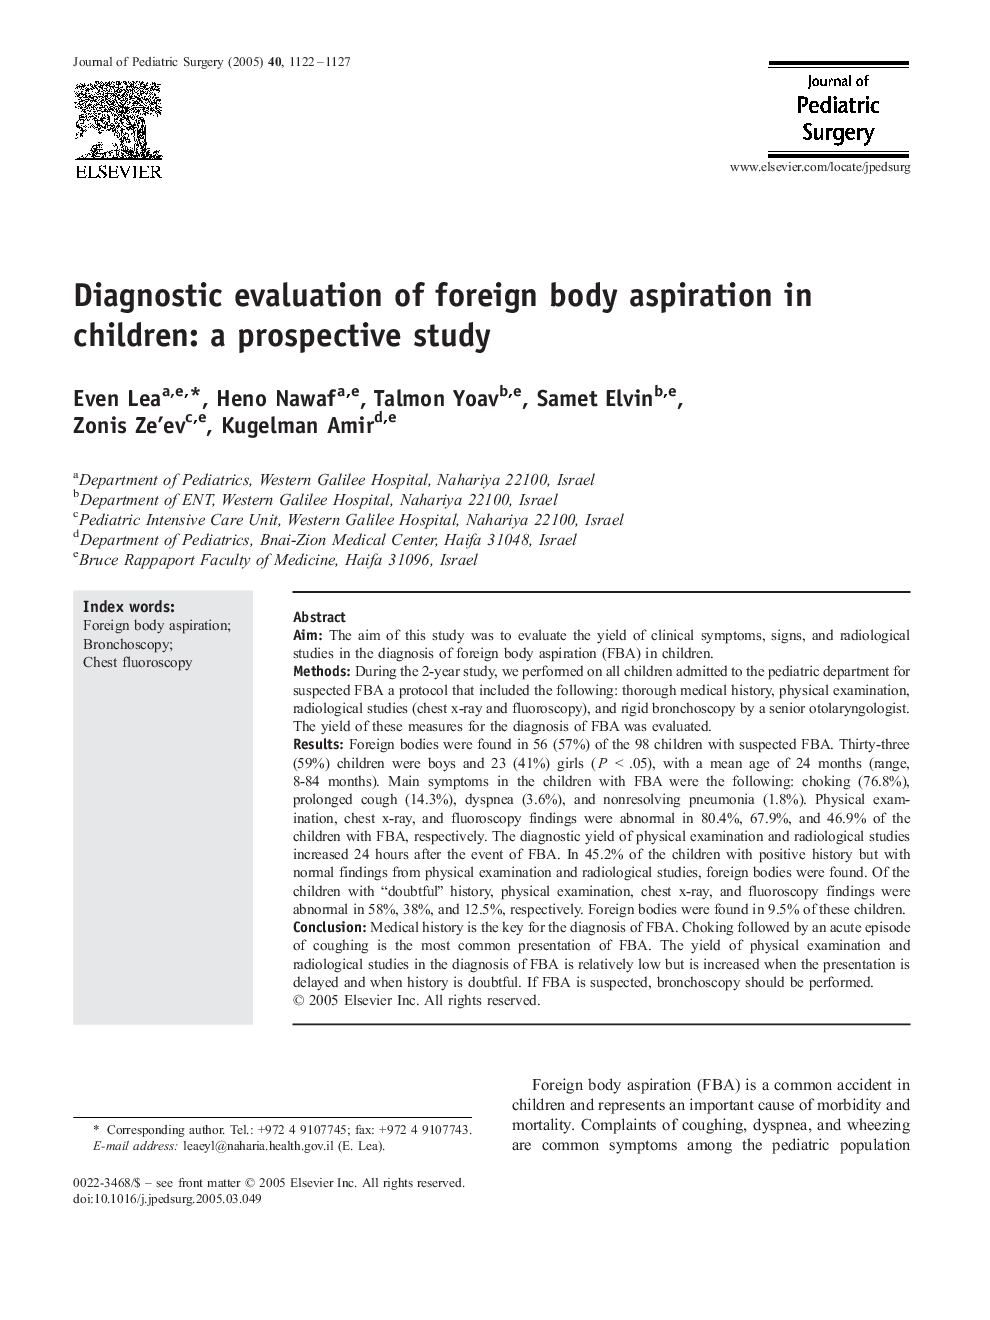 Diagnostic evaluation of foreign body aspiration in children: a prospective study